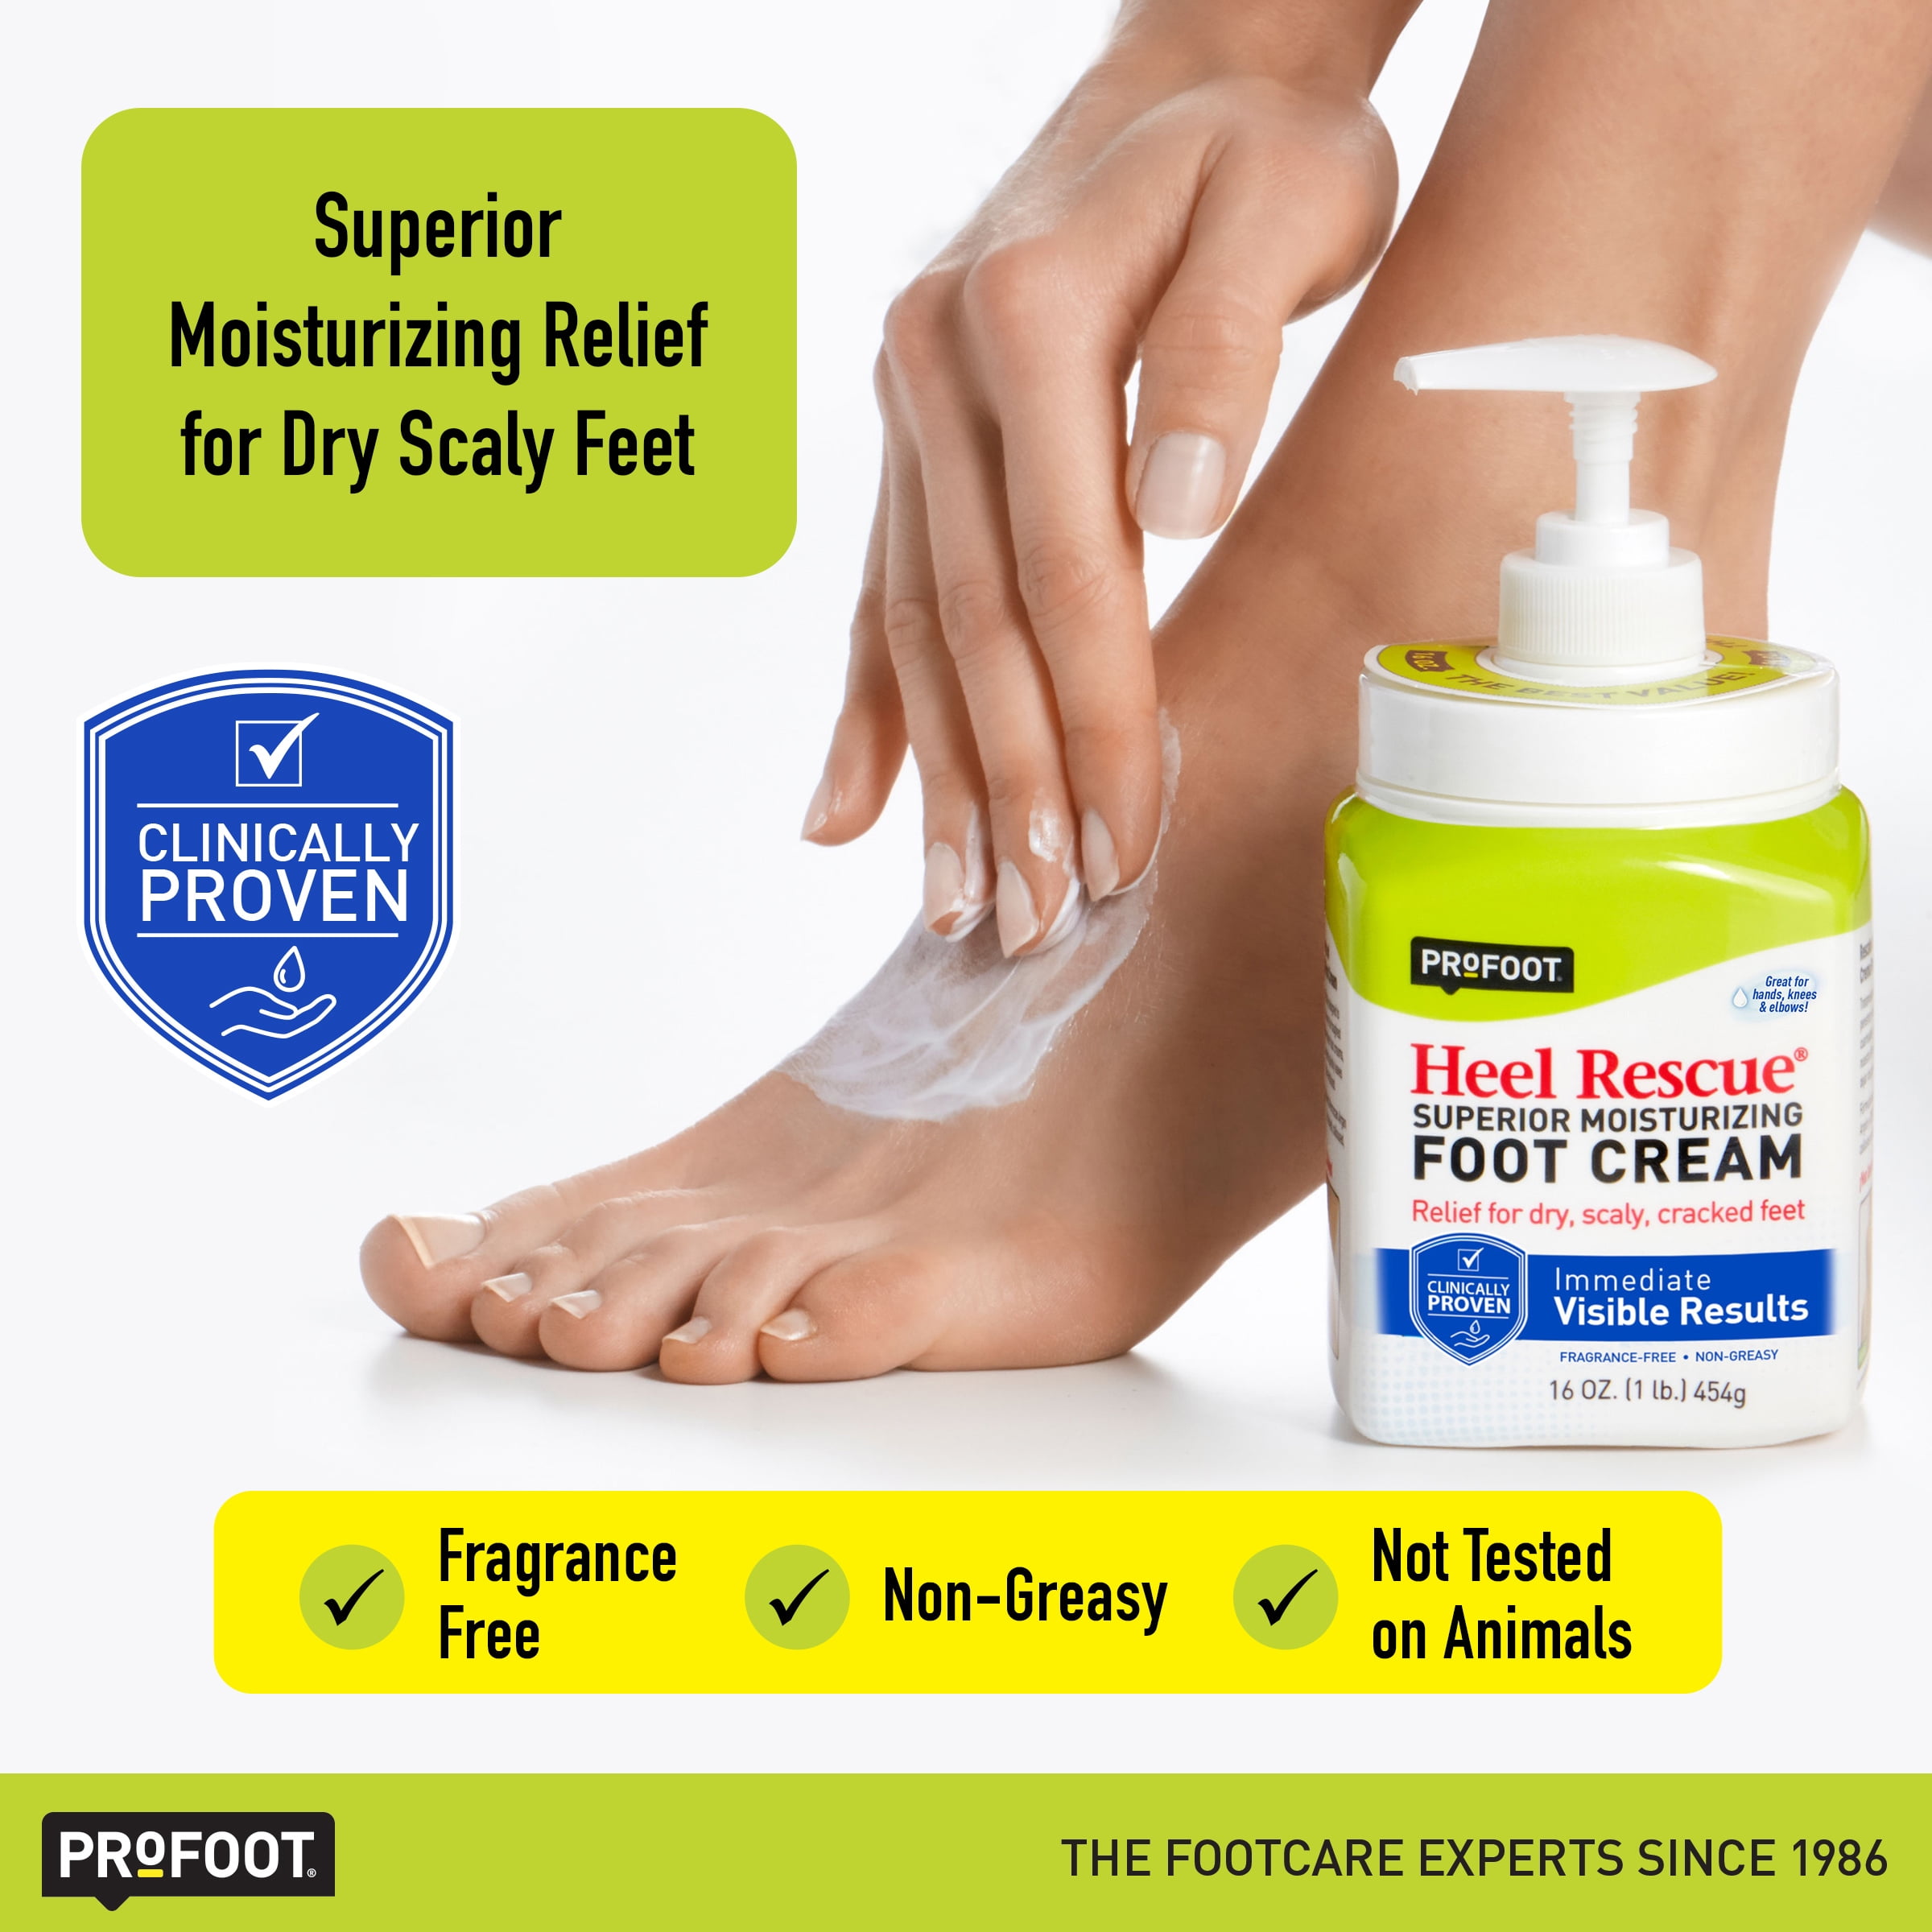 FOOT CURE Tea Tree Oil Foot Balm Moisturizer For Dry Cracked India | Ubuy